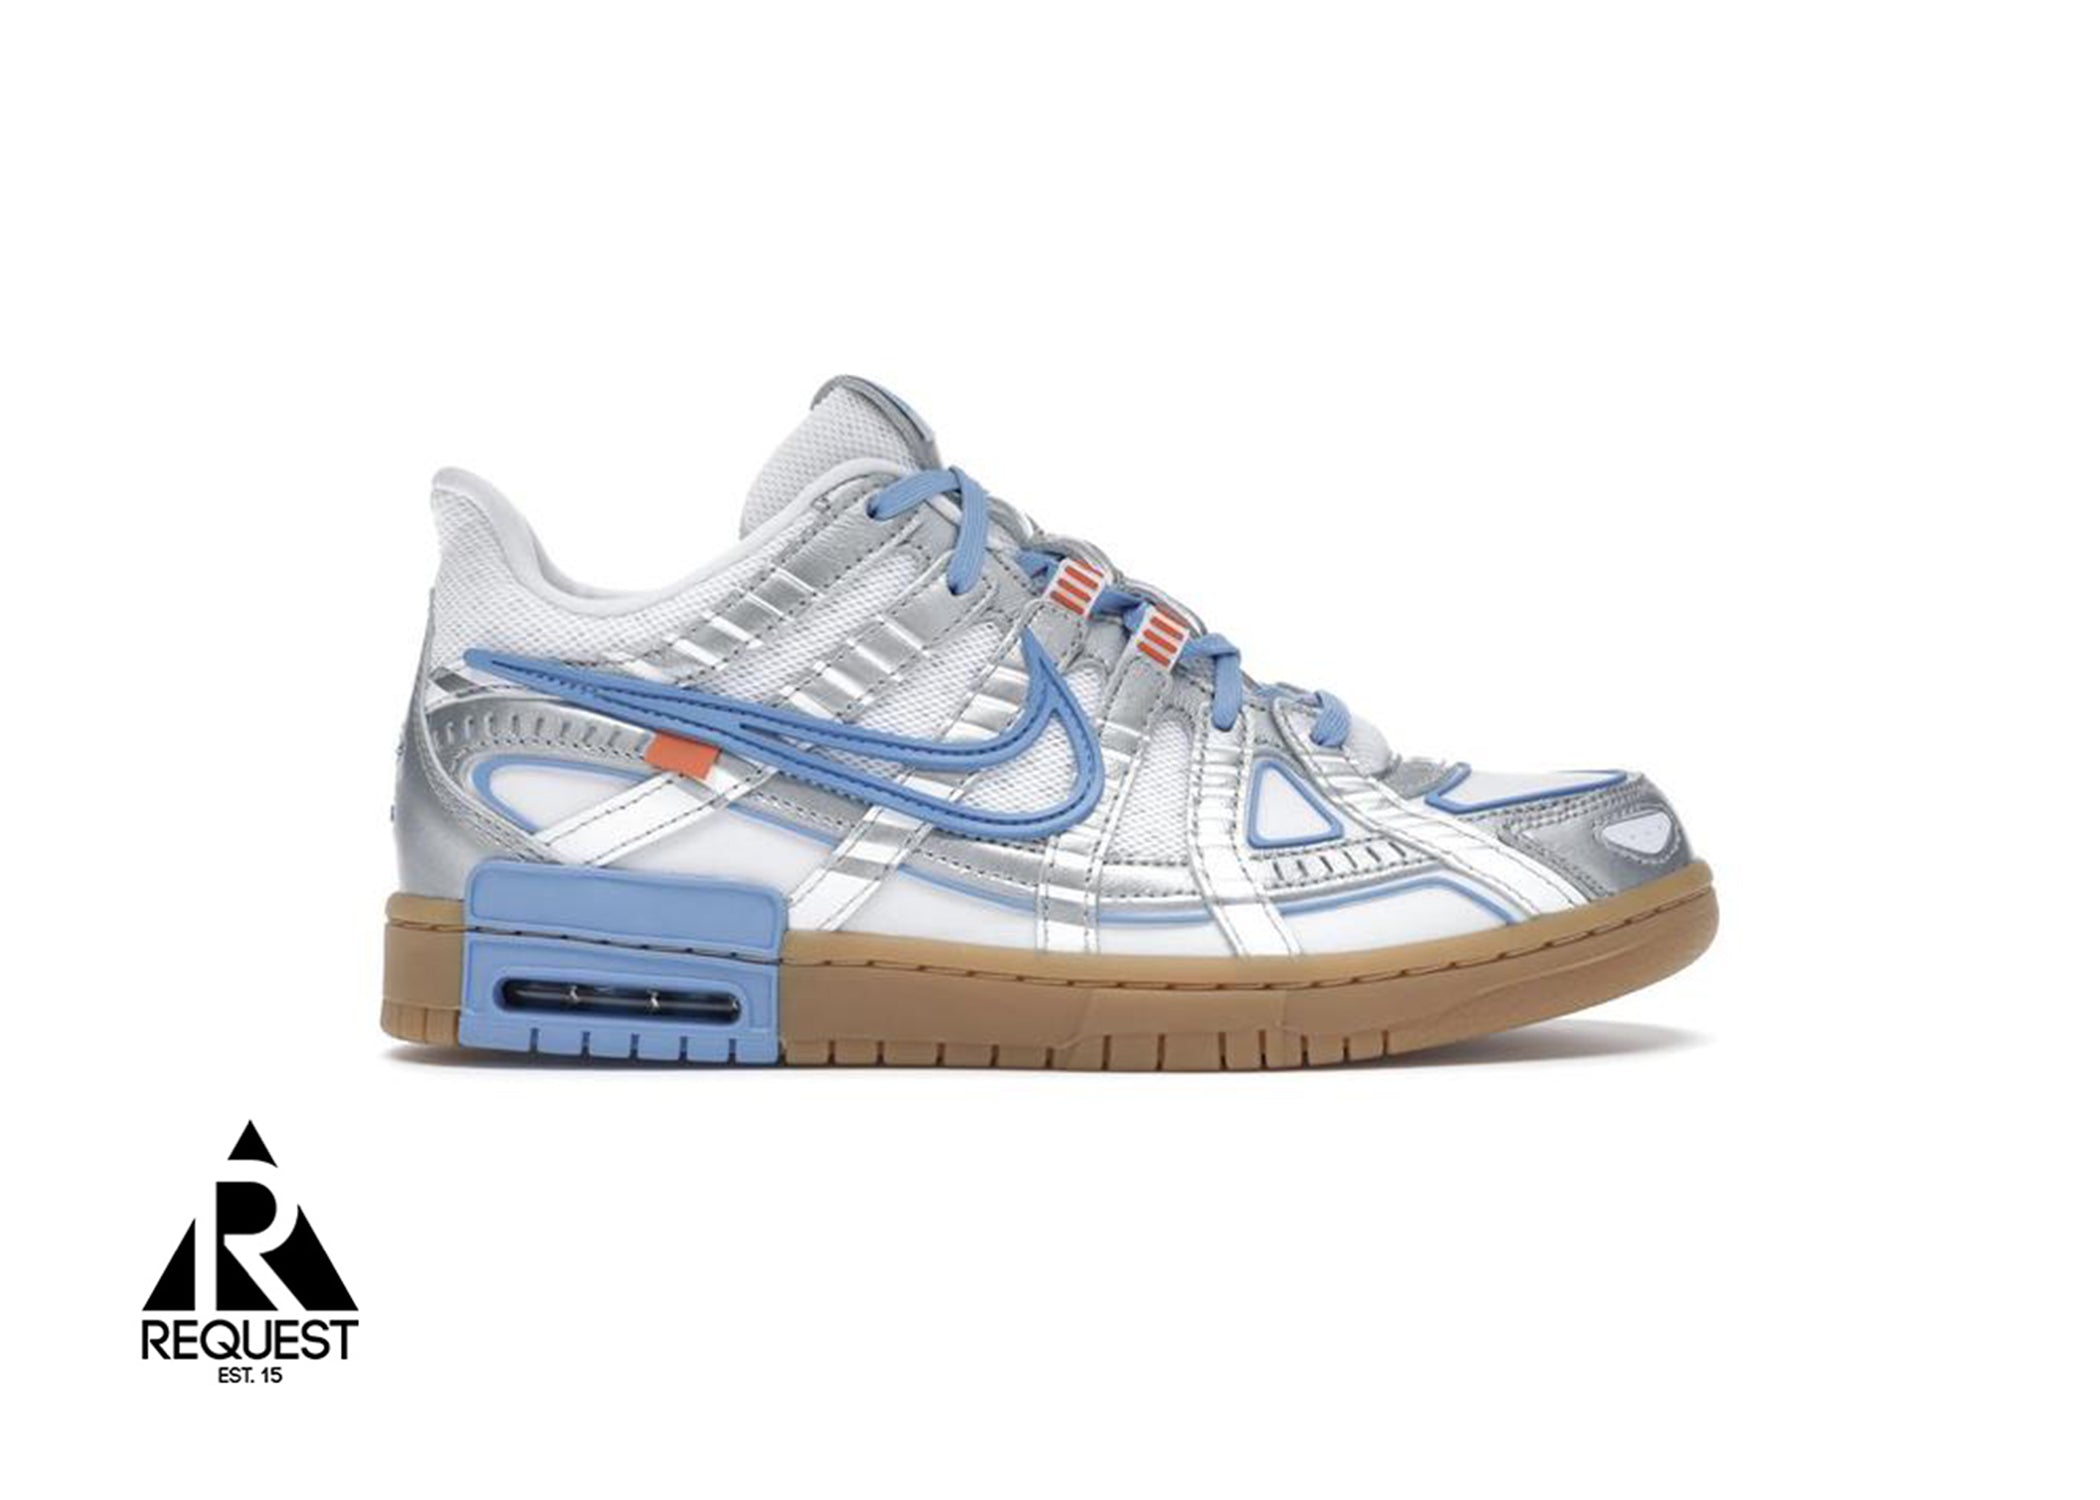 Nike Air Rubber Dunk Off White “UNC”